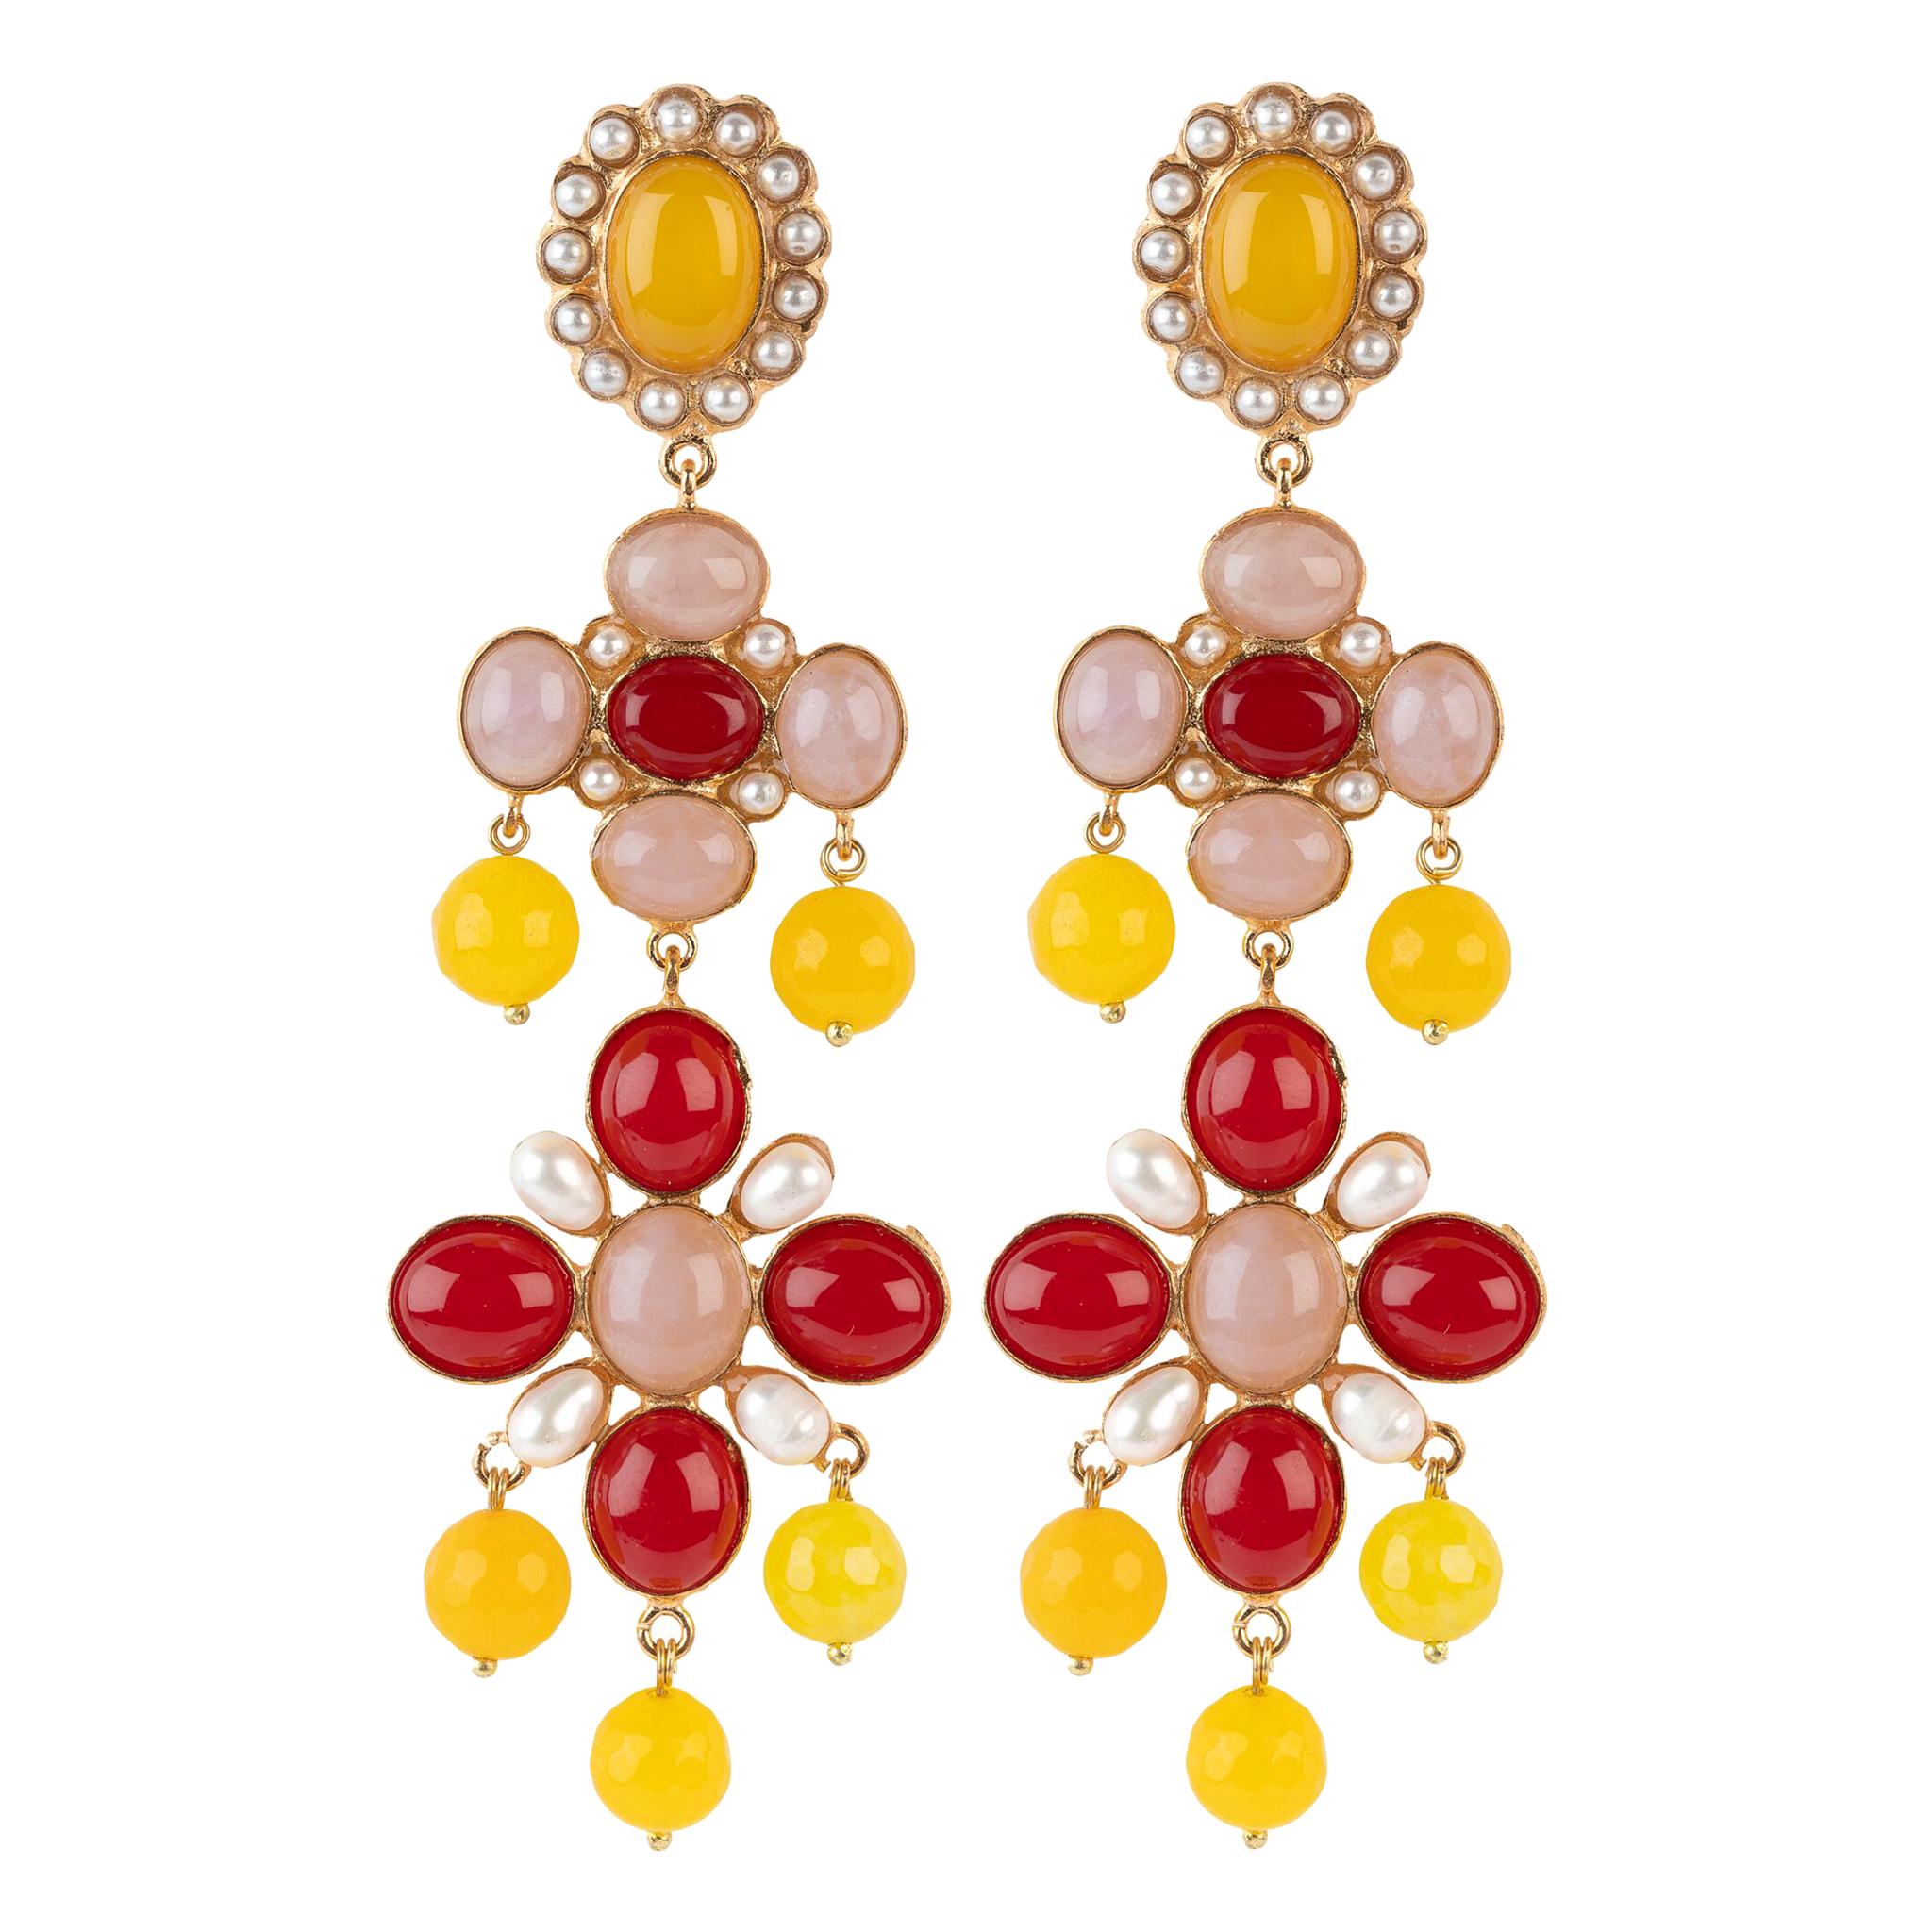 Christie Nicolaides Julietta Earring in Gold with Rose Quartz For Sale